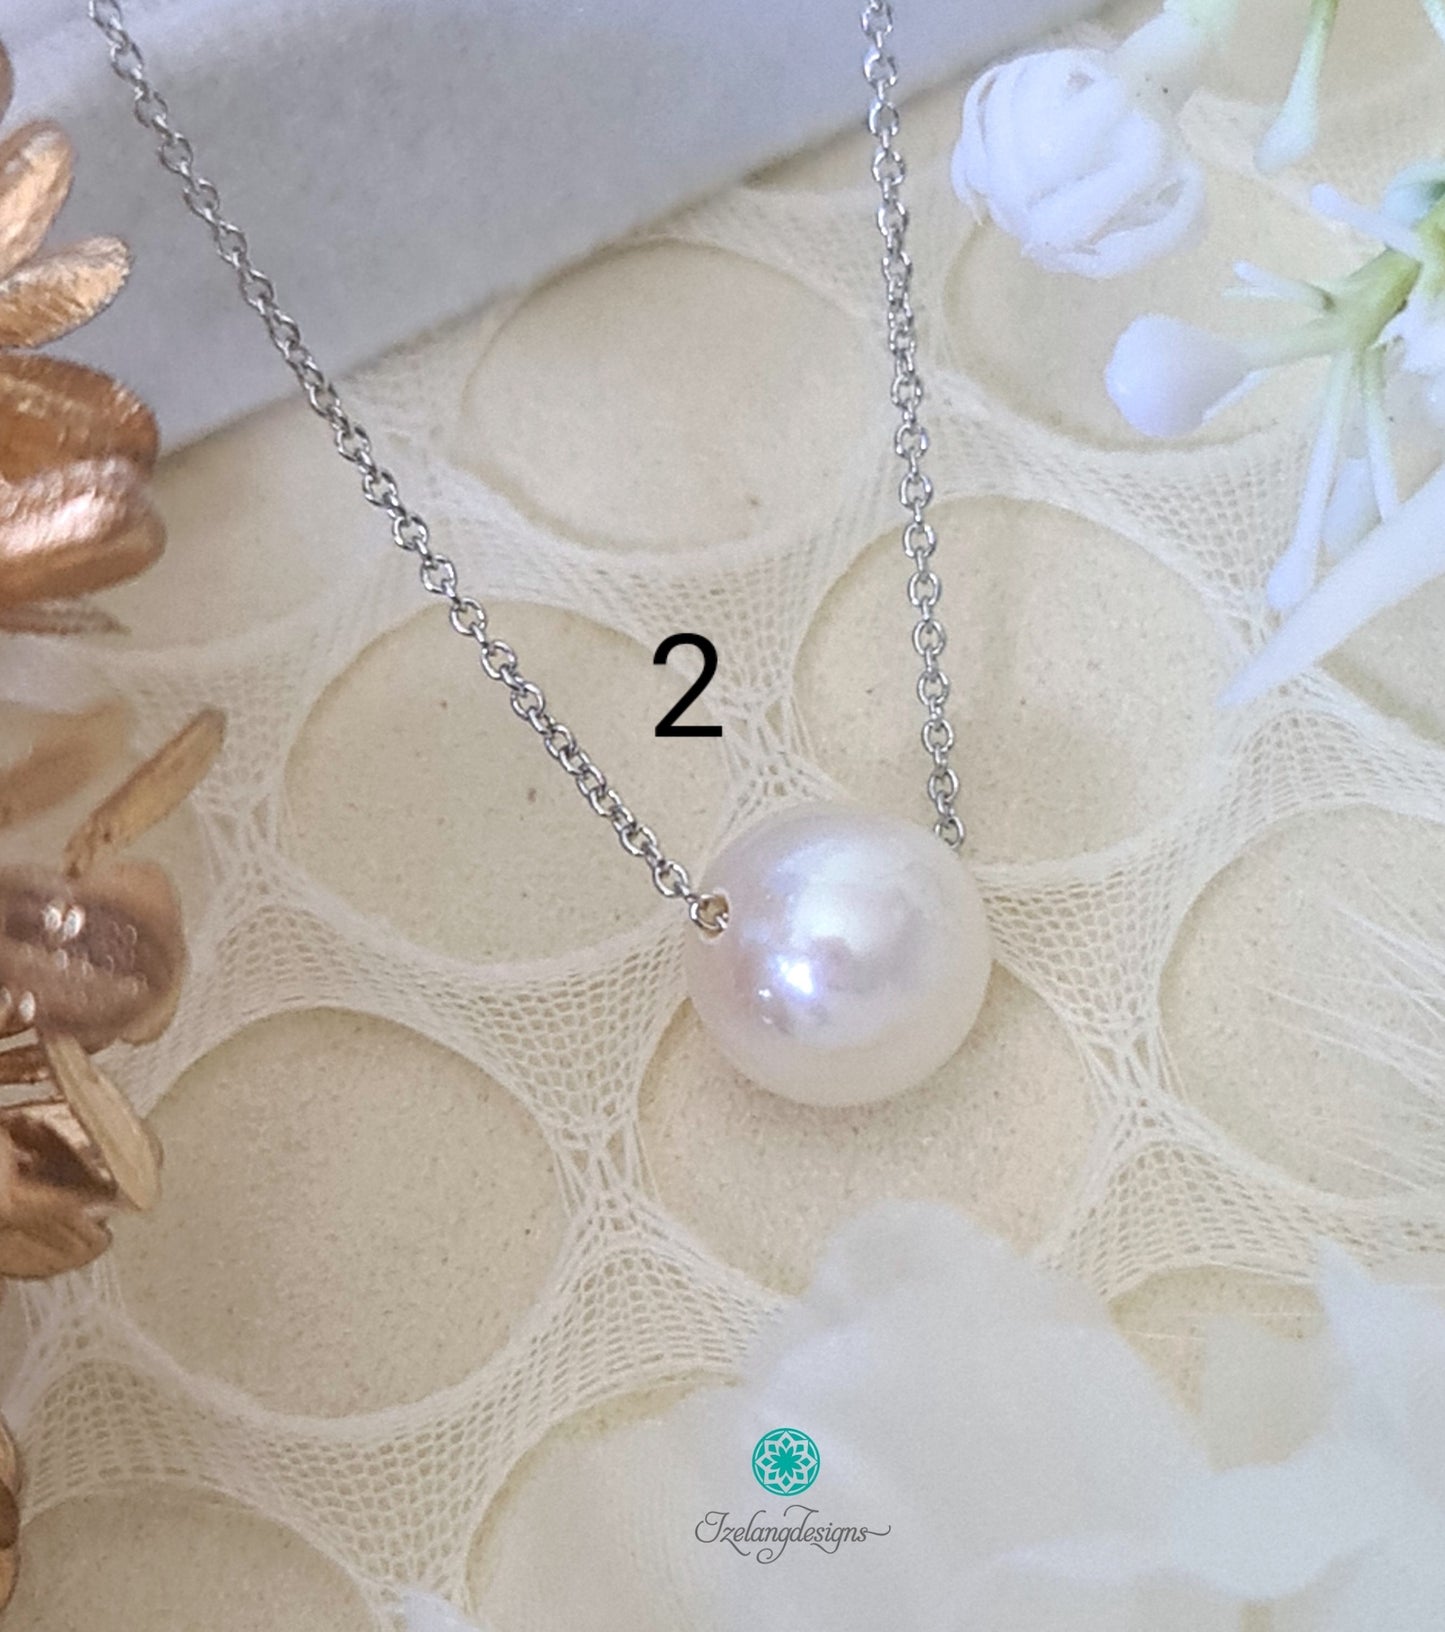 10-11mm White Edison Pearl Necklace in 925 Sterling Silver-NEM012